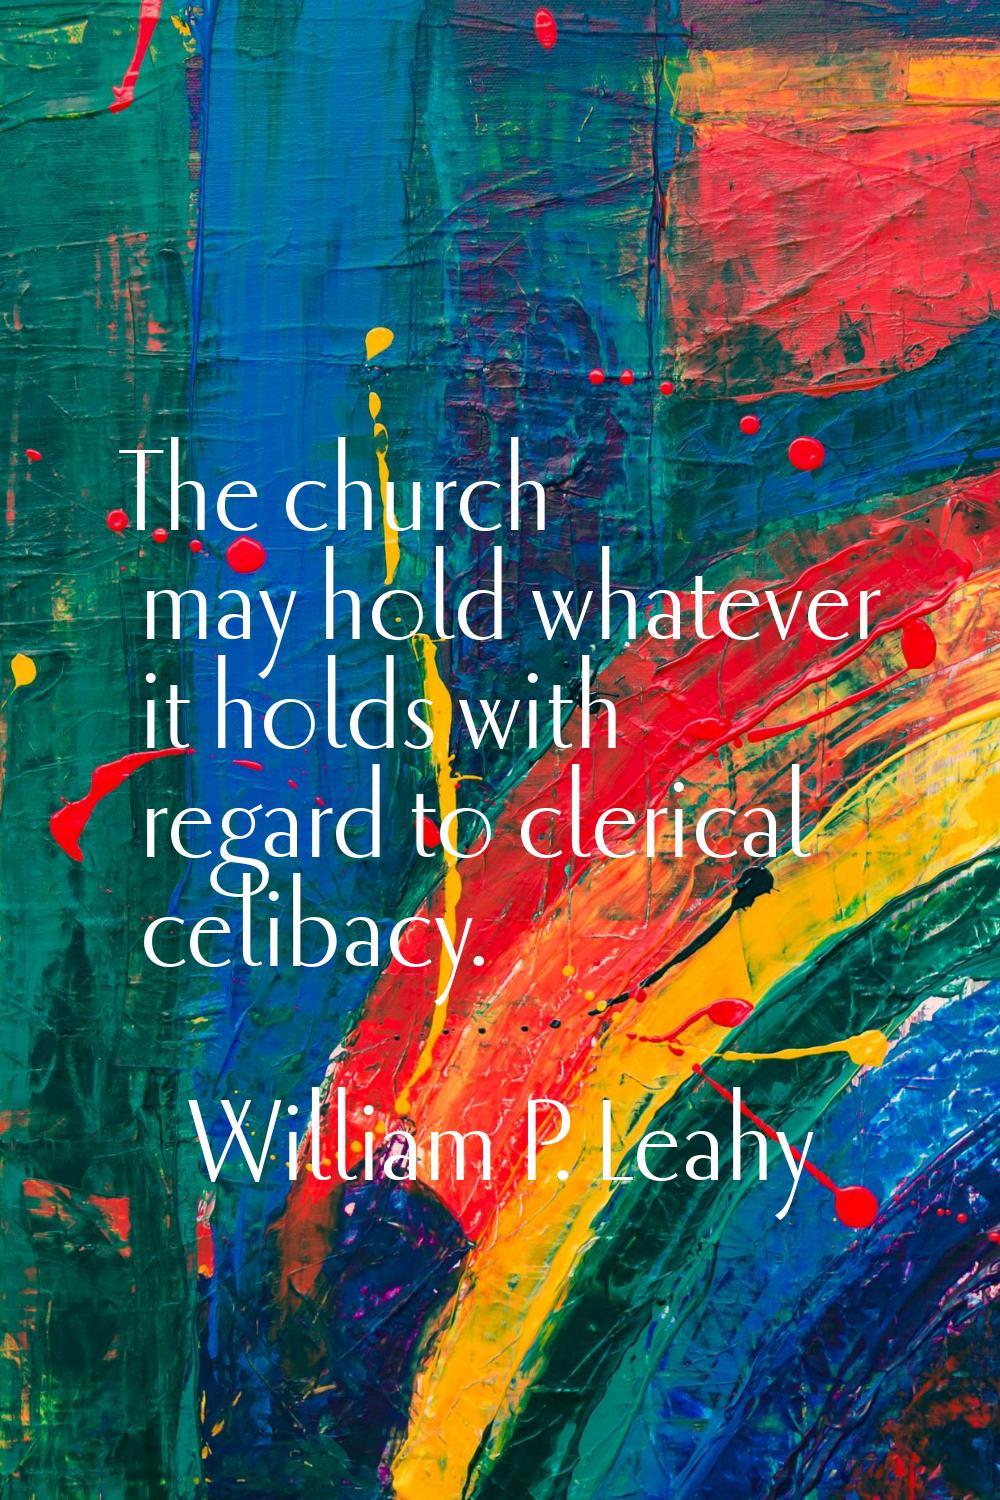 The church may hold whatever it holds with regard to clerical celibacy.